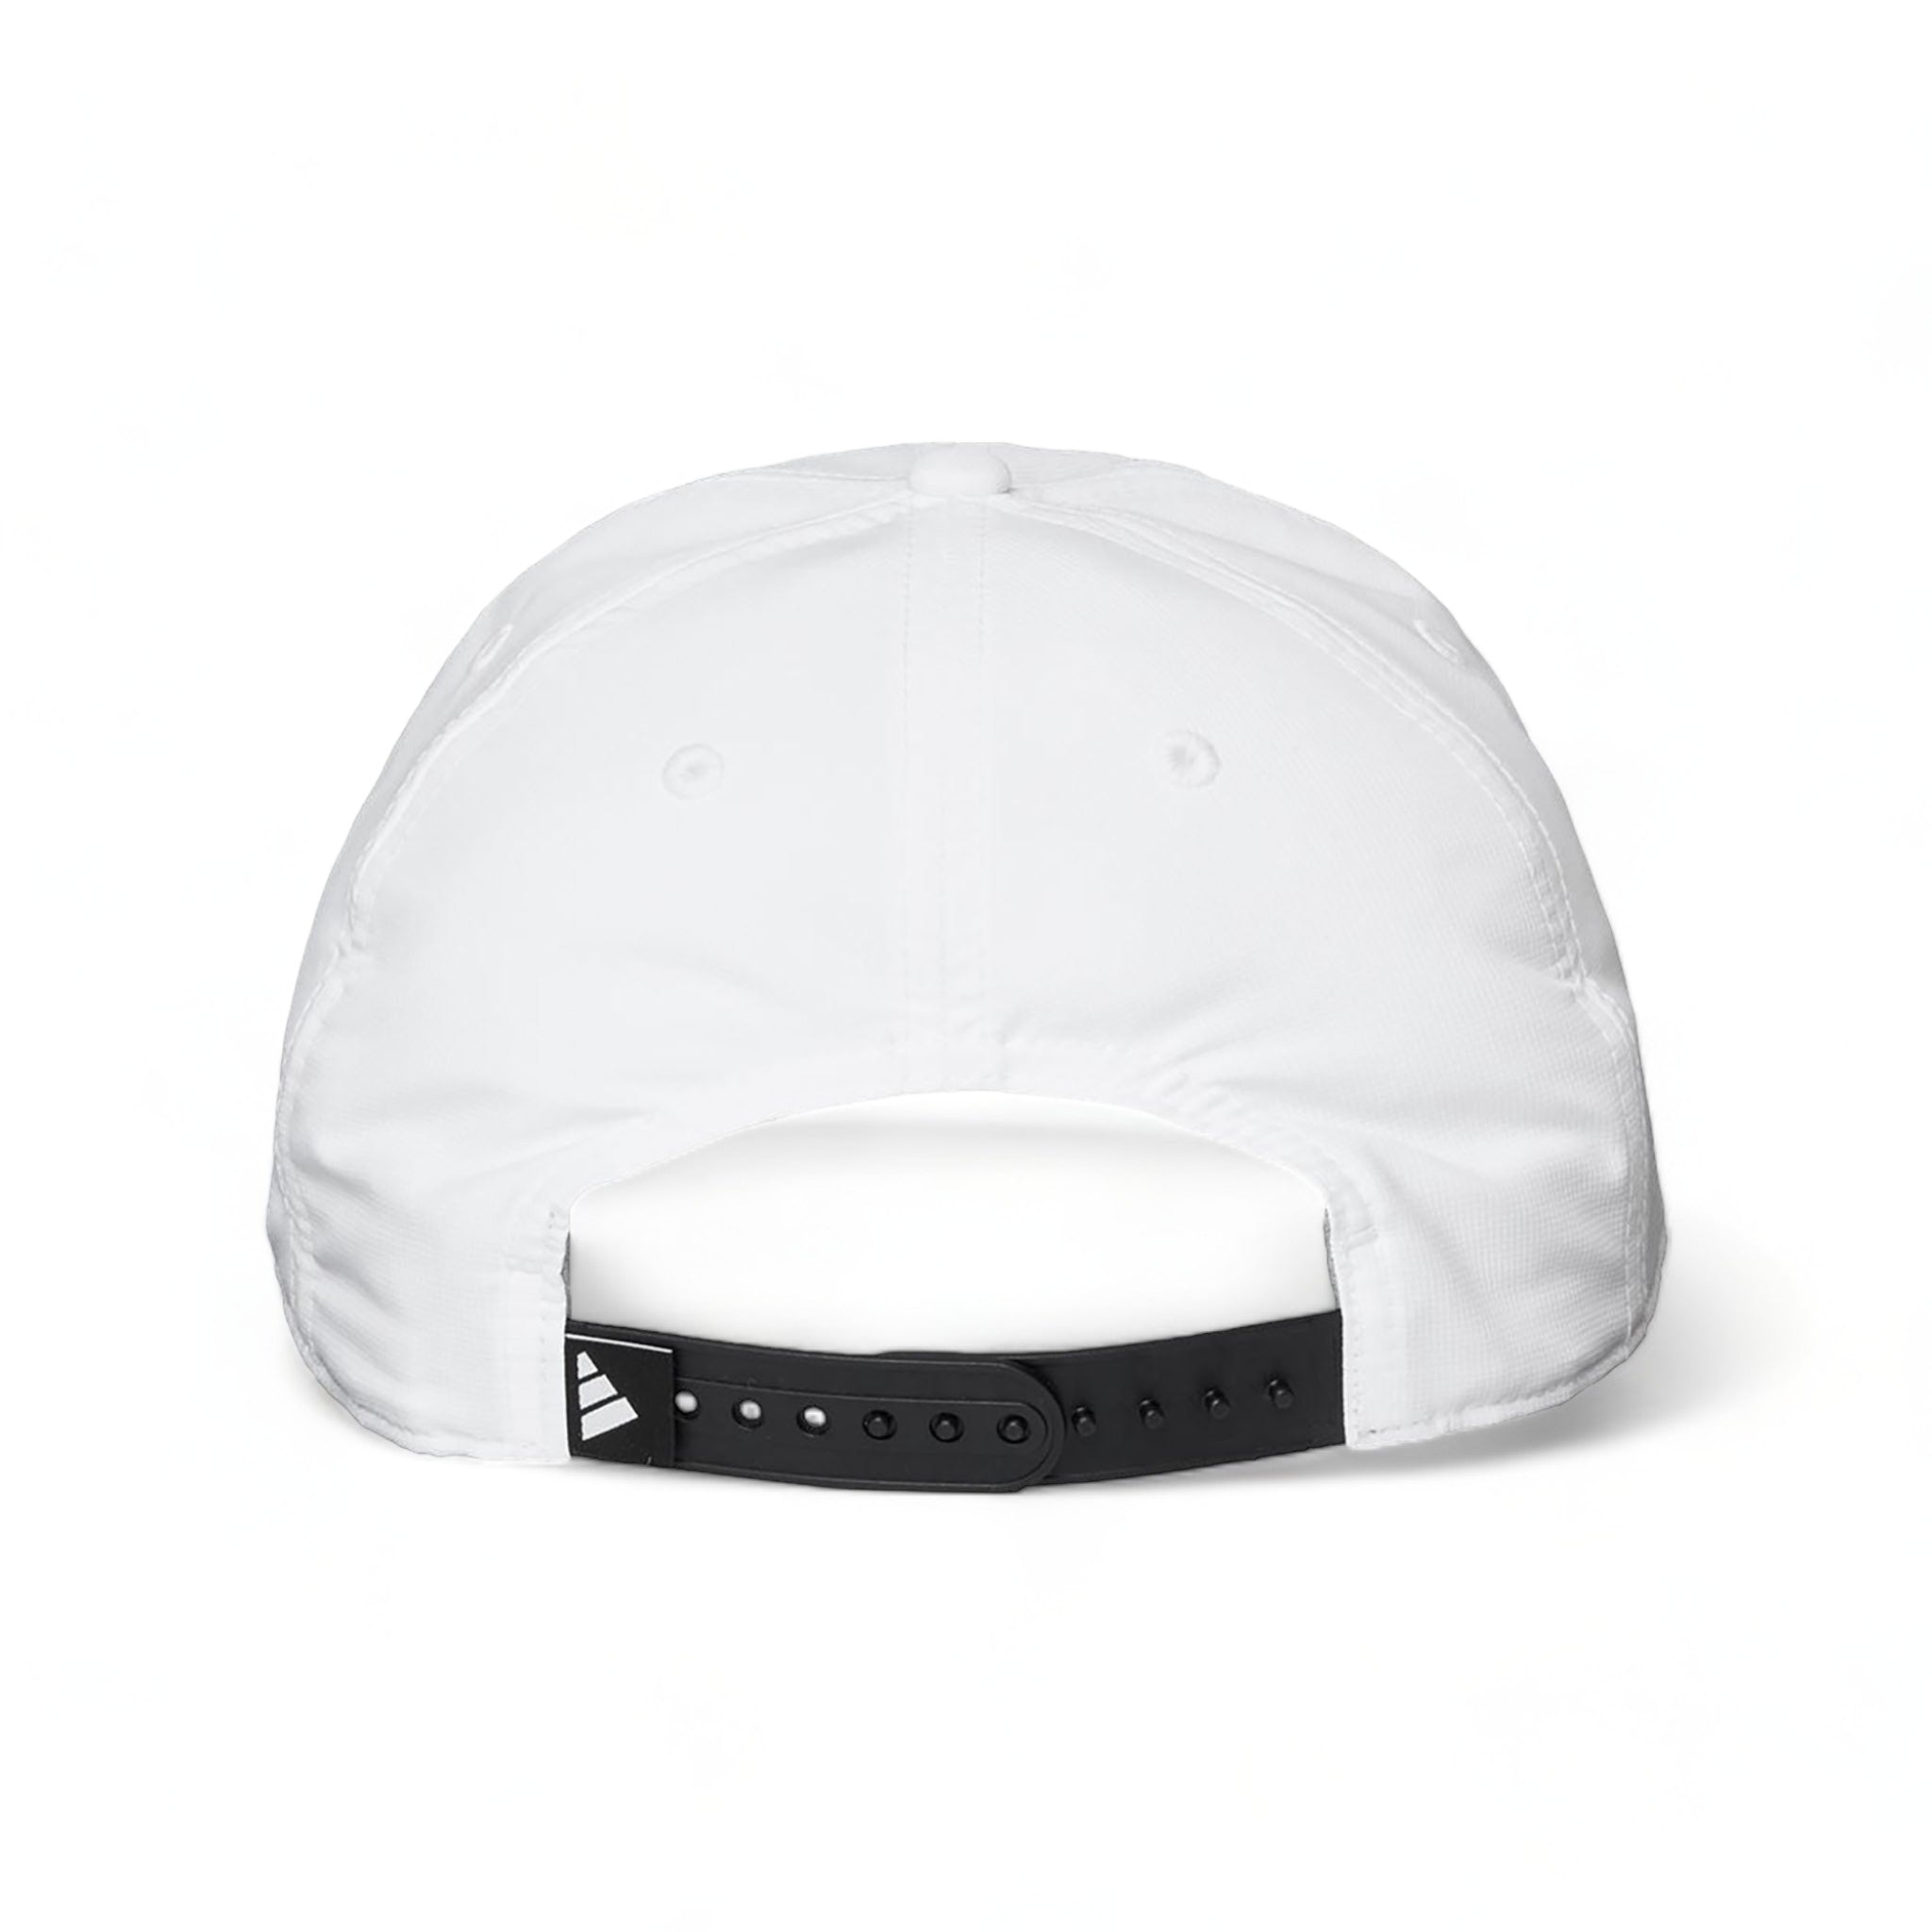 Back view of Adidas A600S custom hat in white